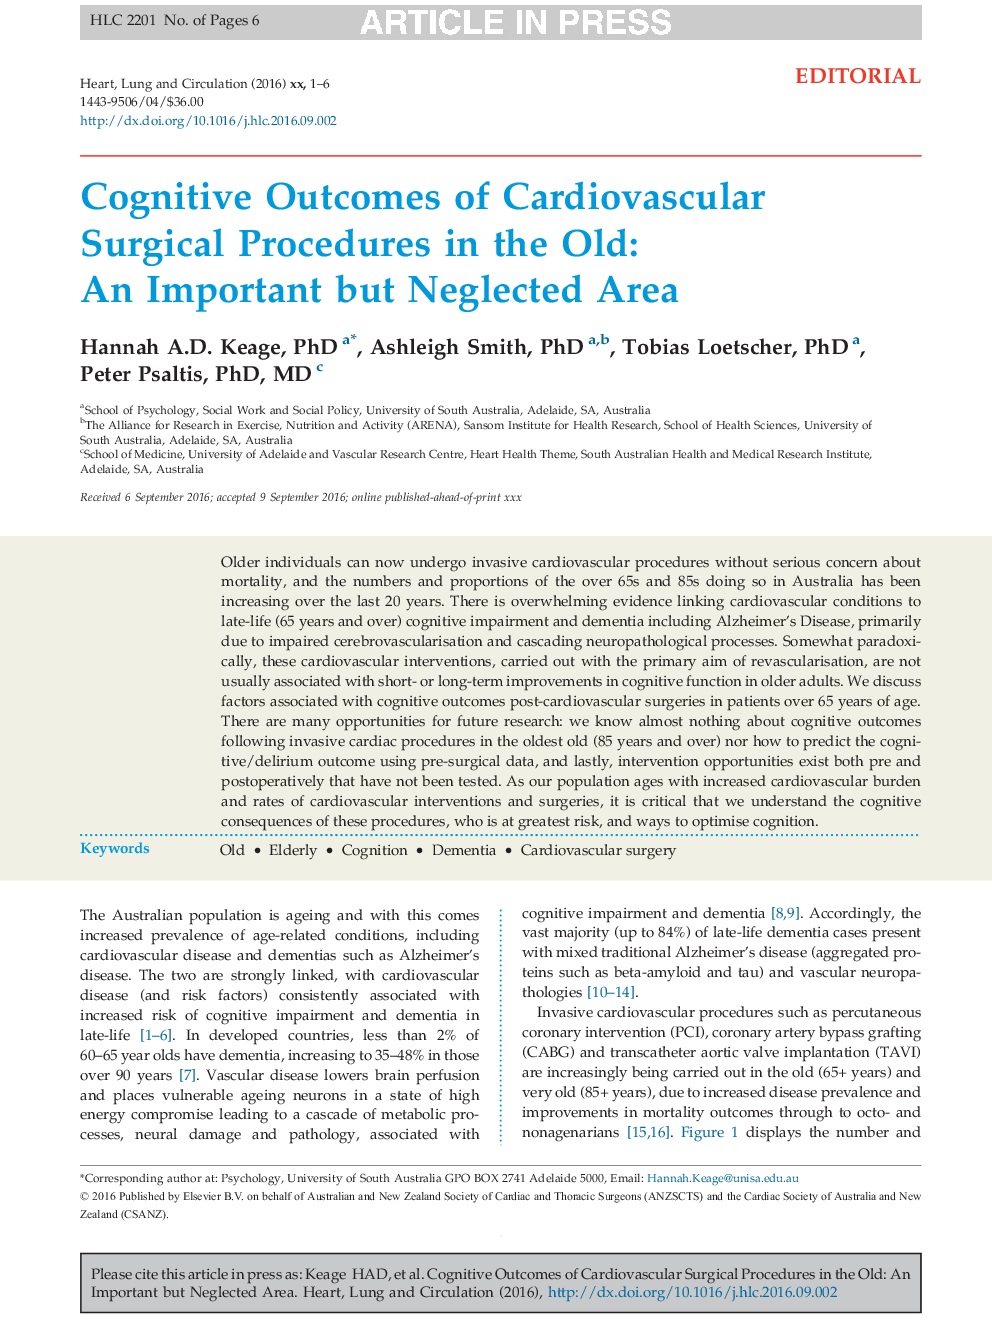 Cognitive Outcomes of Cardiovascular Surgical Procedures in the Old: An Important but Neglected Area